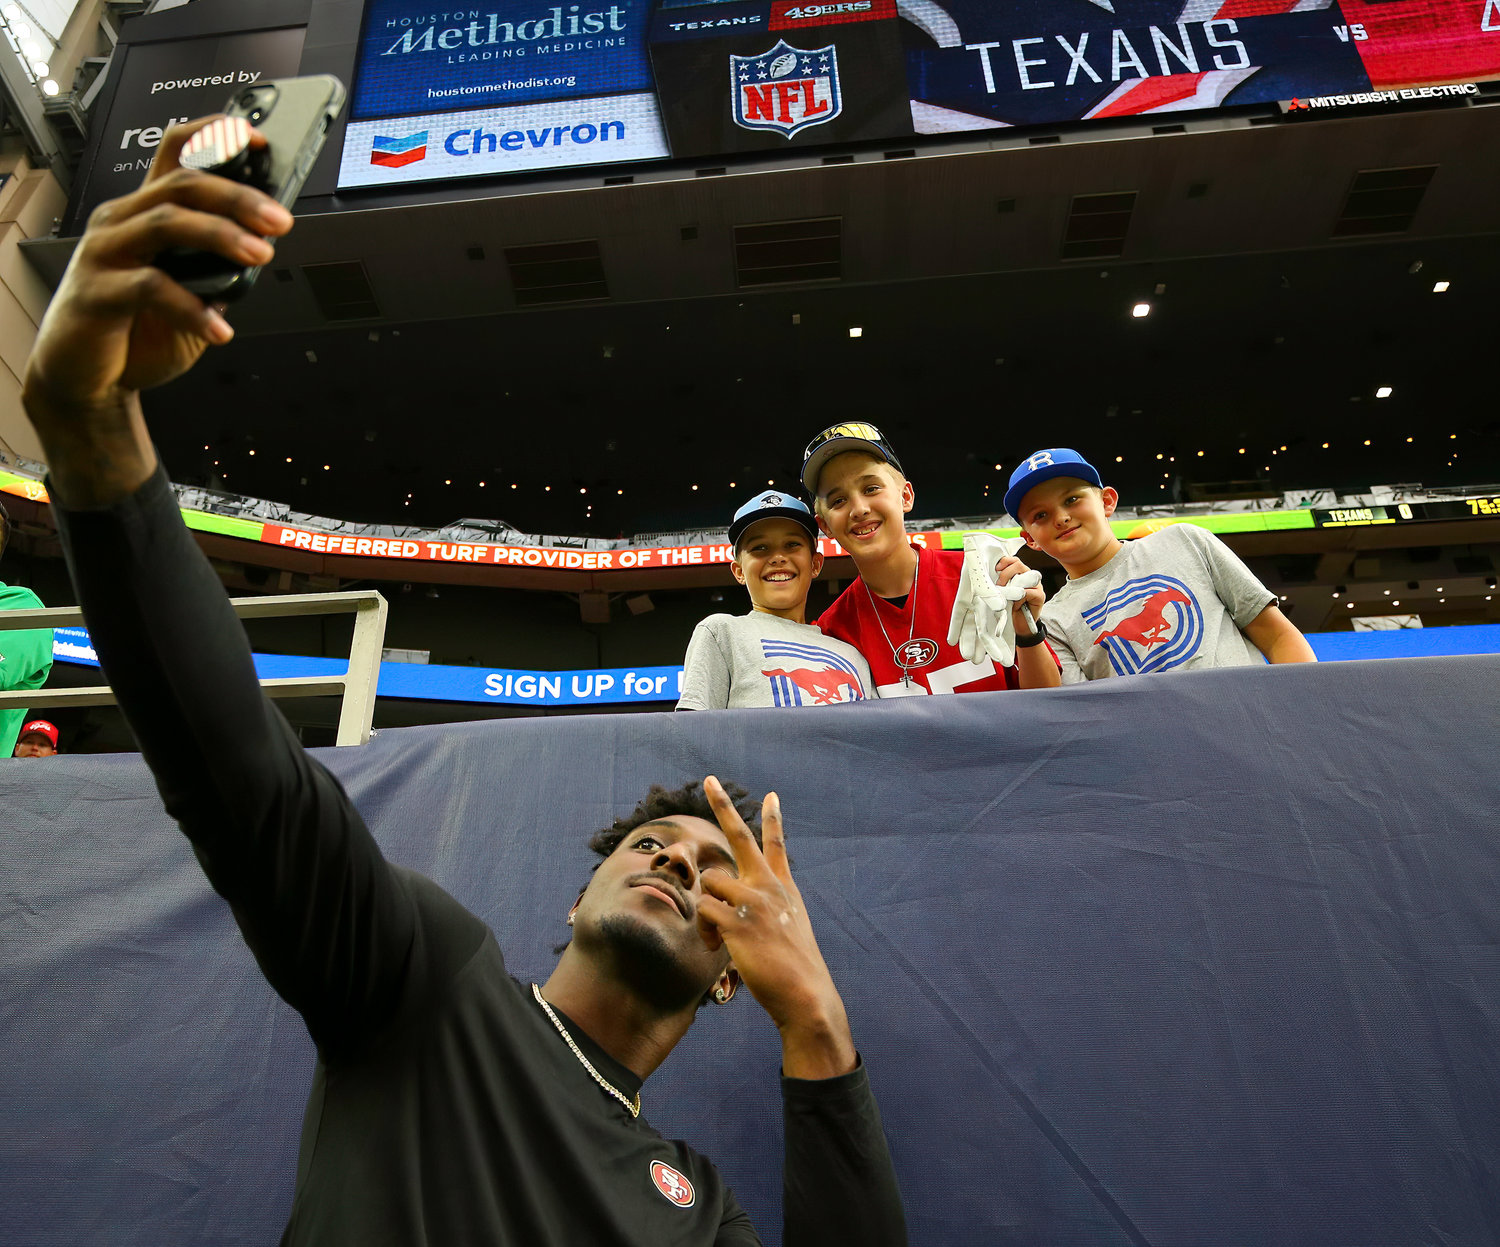 San Francisco 49ers wide receiver Danny Gray (86) takes a photo with a group of young fans before the start of an NFL preseason game between the Texans and the 49ers in Houston, Texas, on August 25, 2022.